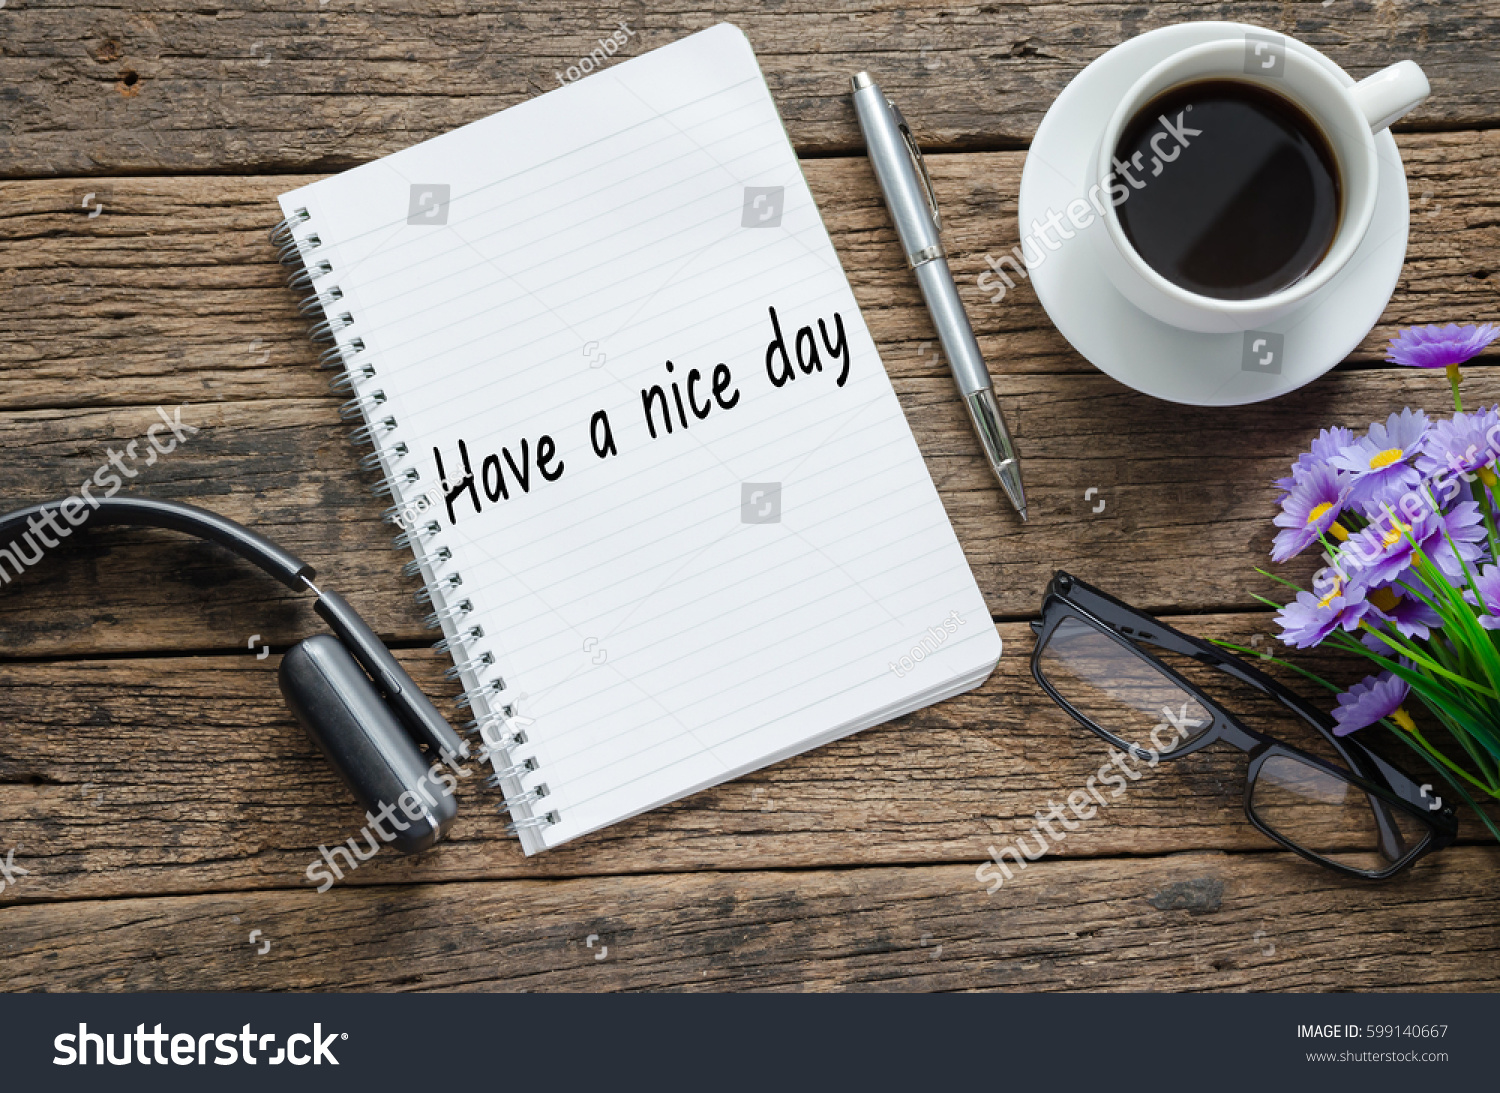 Have a nice day concept business #599140667